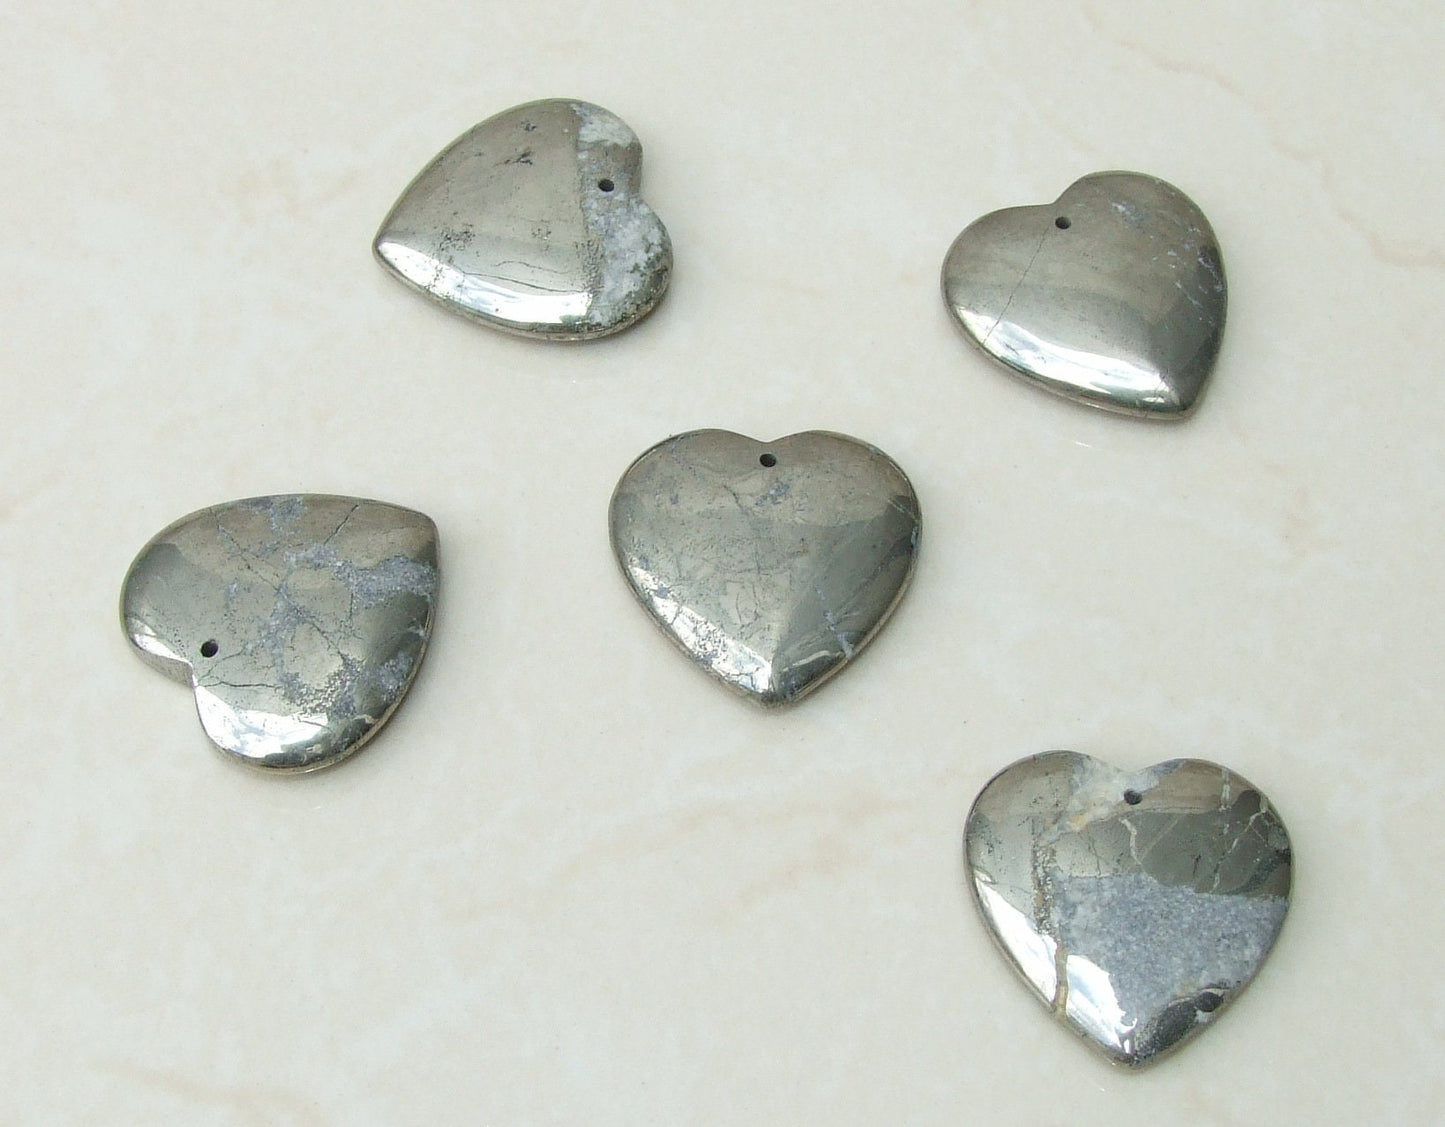 Pyrite Heart Shaped Pendant, Gemstone Pendant, Polished Pyrite, Natural Pyrite, Fools Gold, Pyrite Jewelry, Loose Stones, 40mm x 40mm